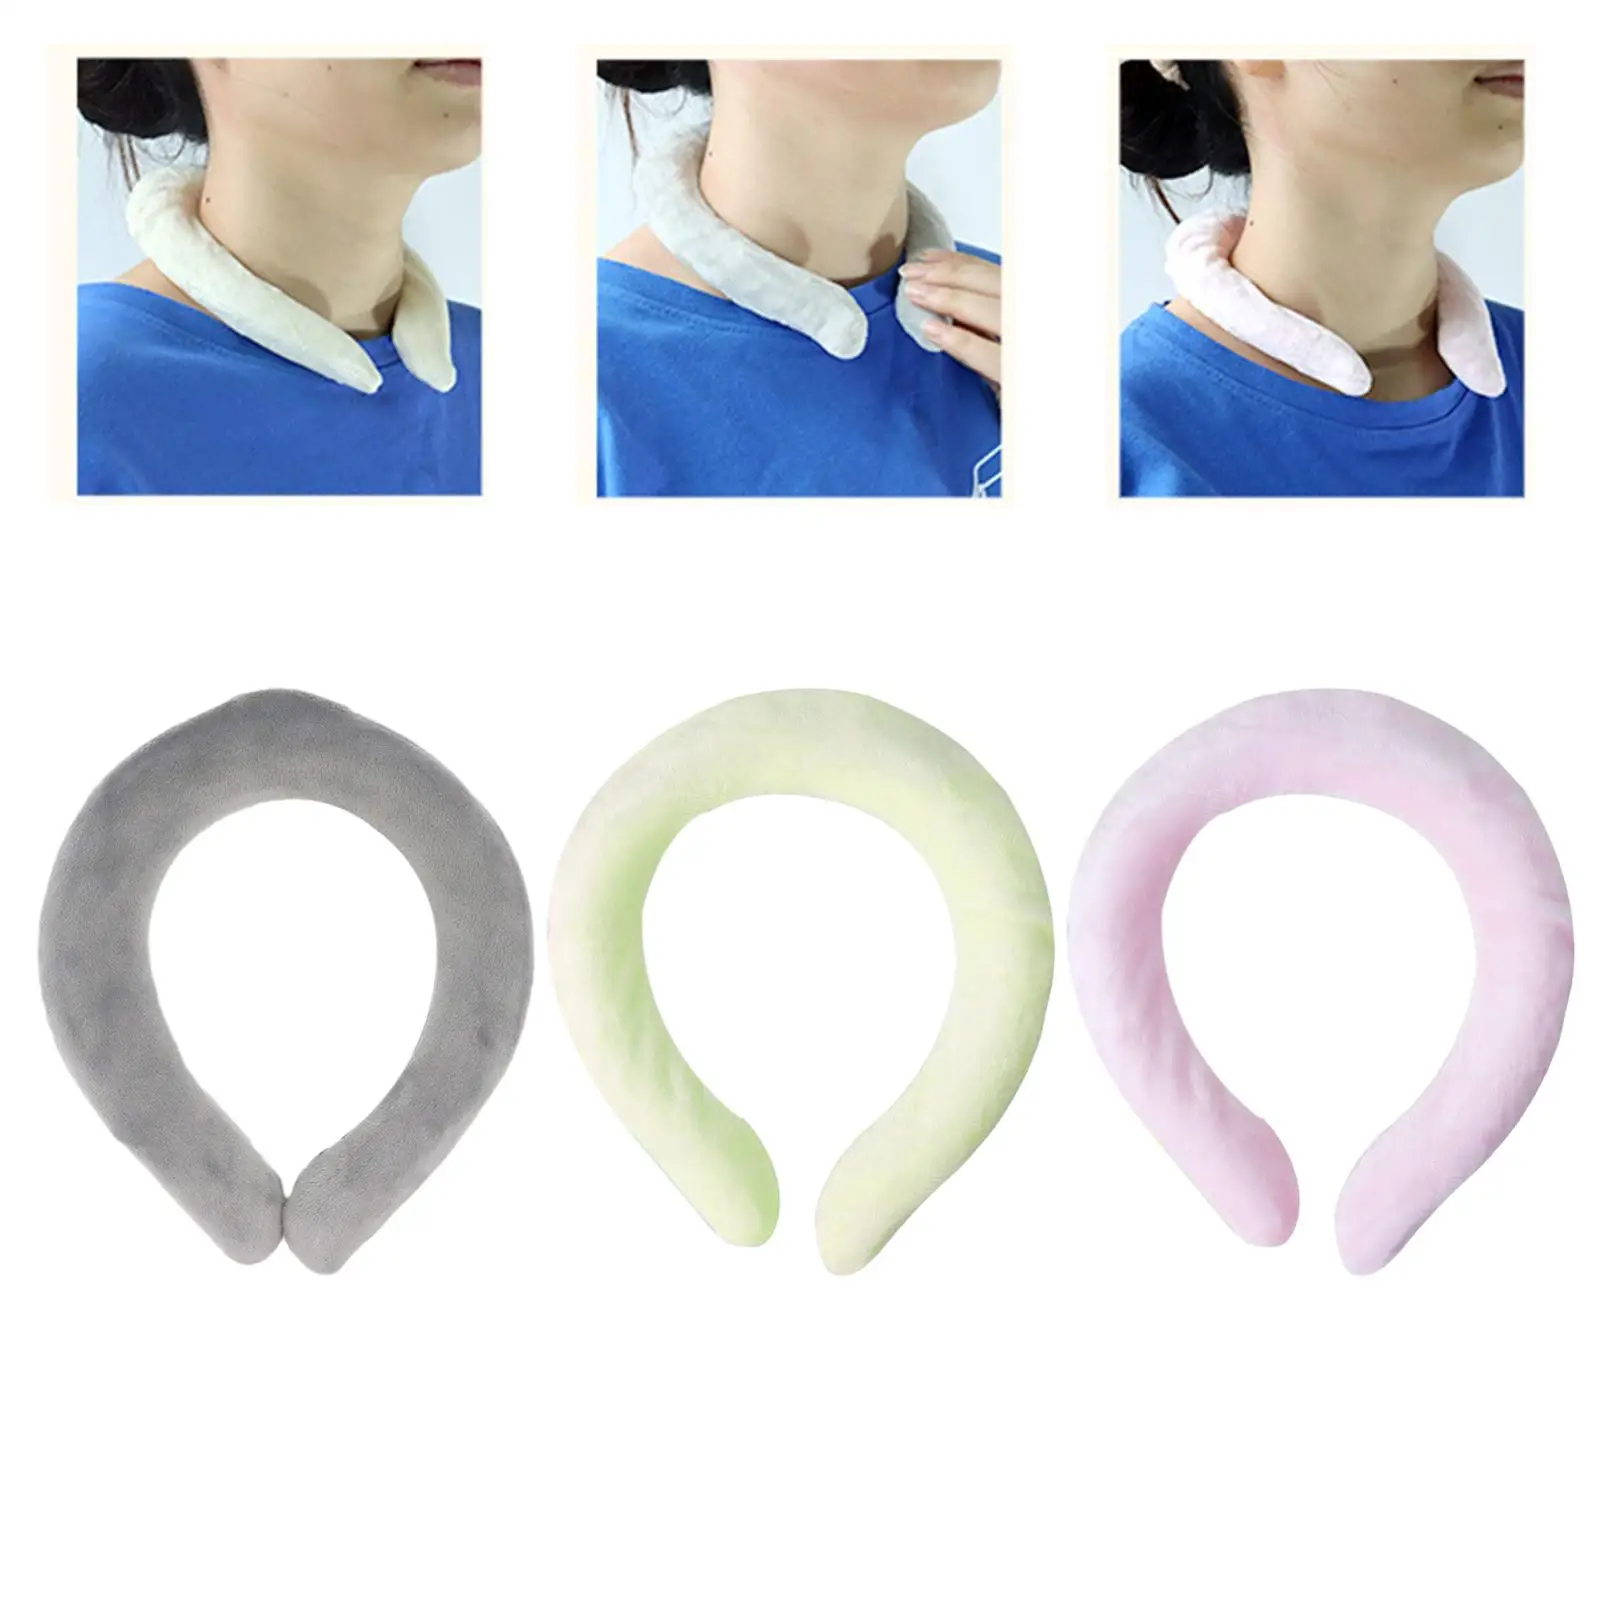 Neck Heat Ring Hot Pack Hands Free Wearable Heating Pad Microwavable Reusable for Cold Weather Neck Warmer Neck Heating Tube